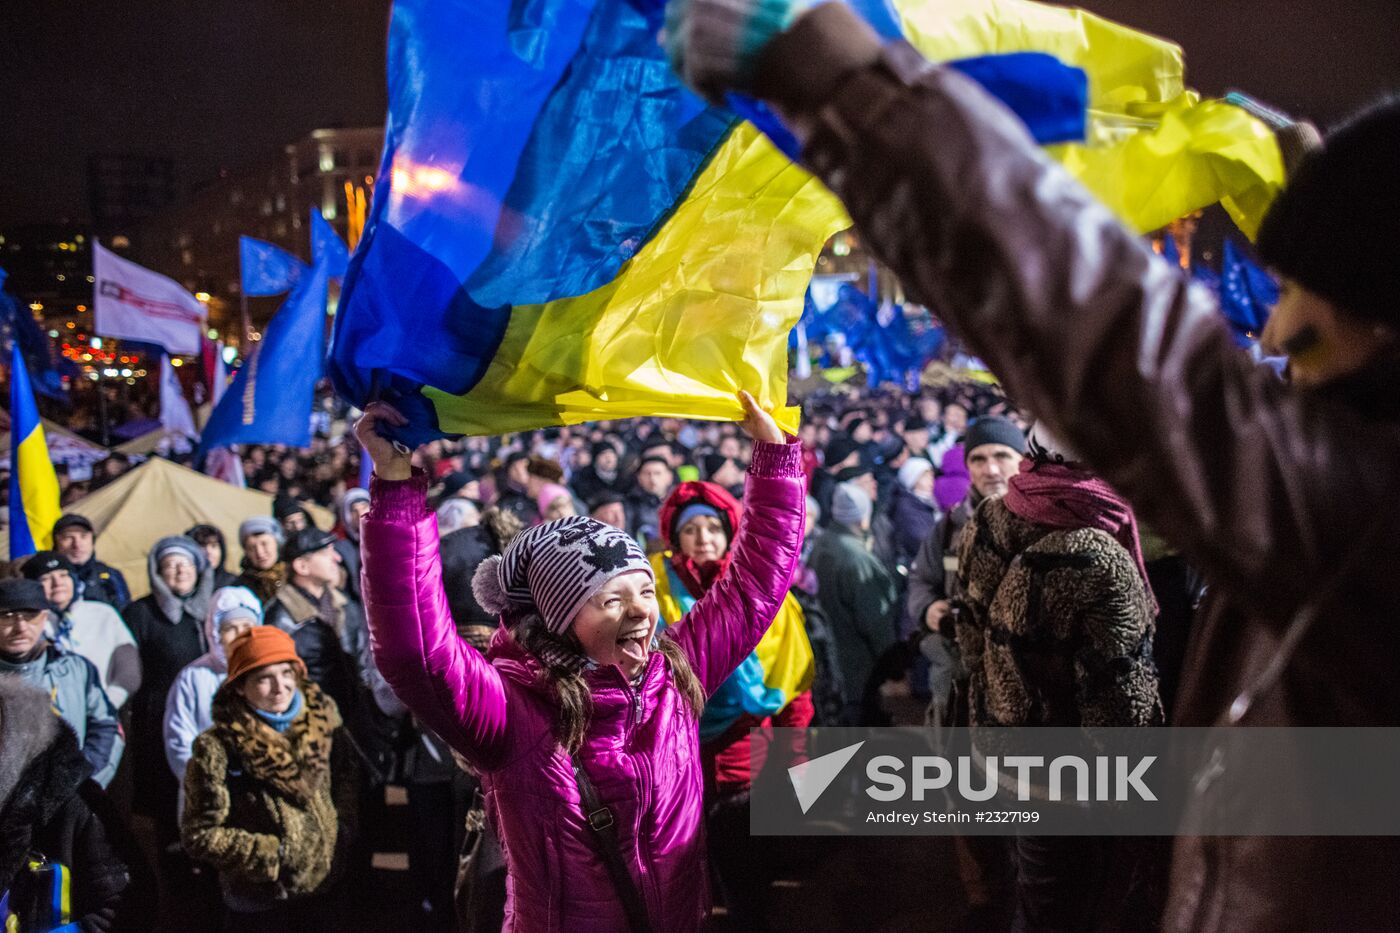 Riots in Ukraine after government refusal to join EU